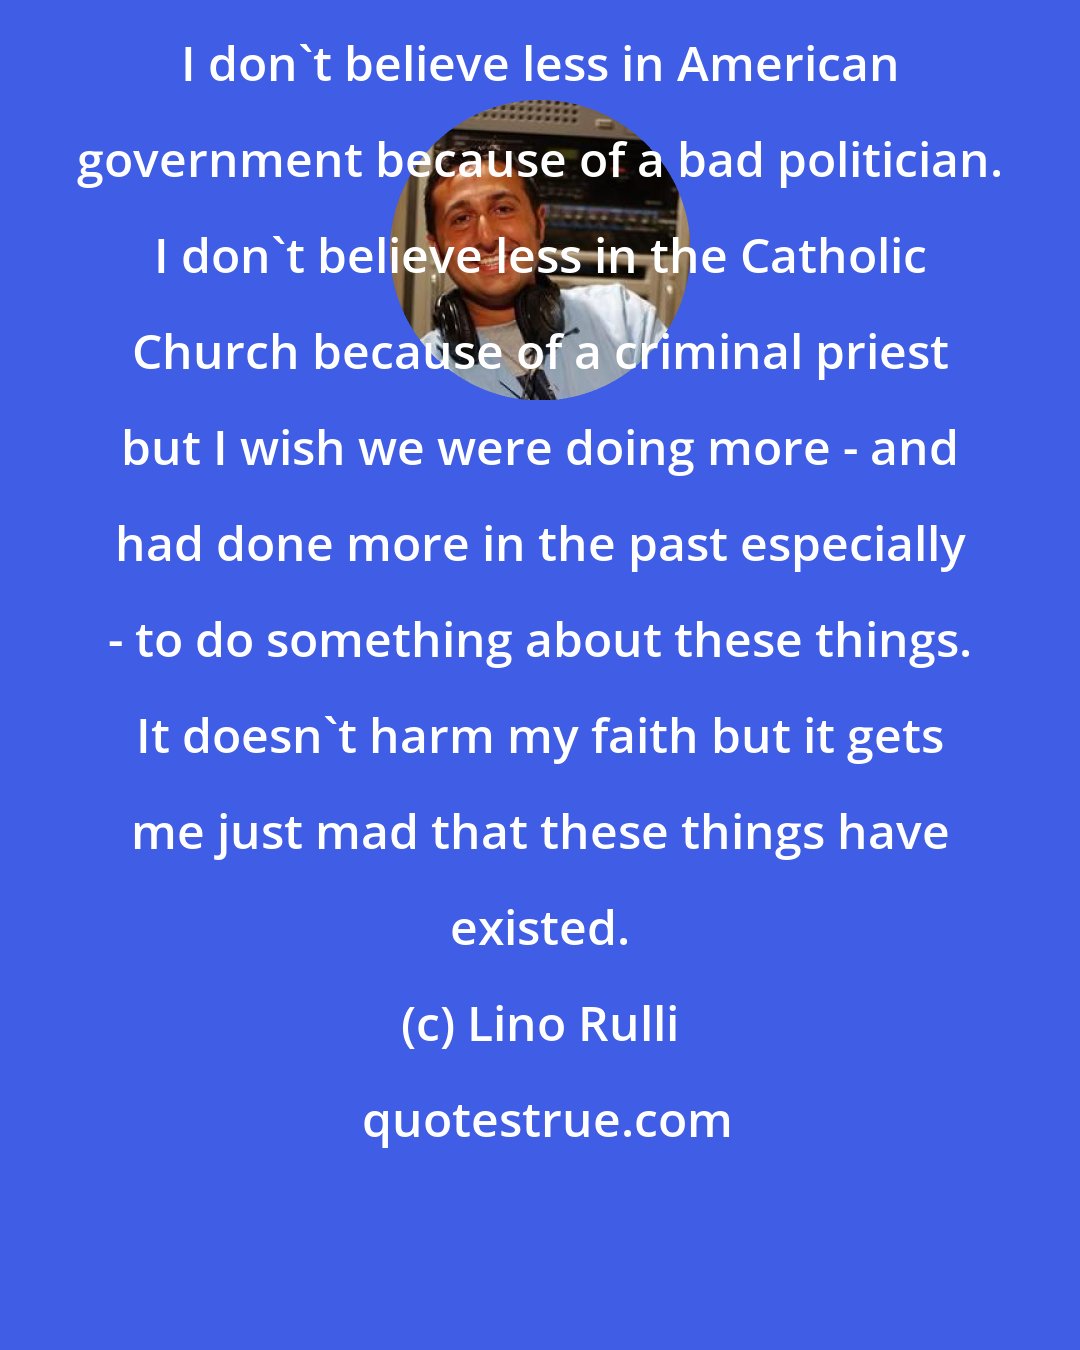 Lino Rulli: I don't believe less in American government because of a bad politician. I don't believe less in the Catholic Church because of a criminal priest but I wish we were doing more - and had done more in the past especially - to do something about these things. It doesn't harm my faith but it gets me just mad that these things have existed.